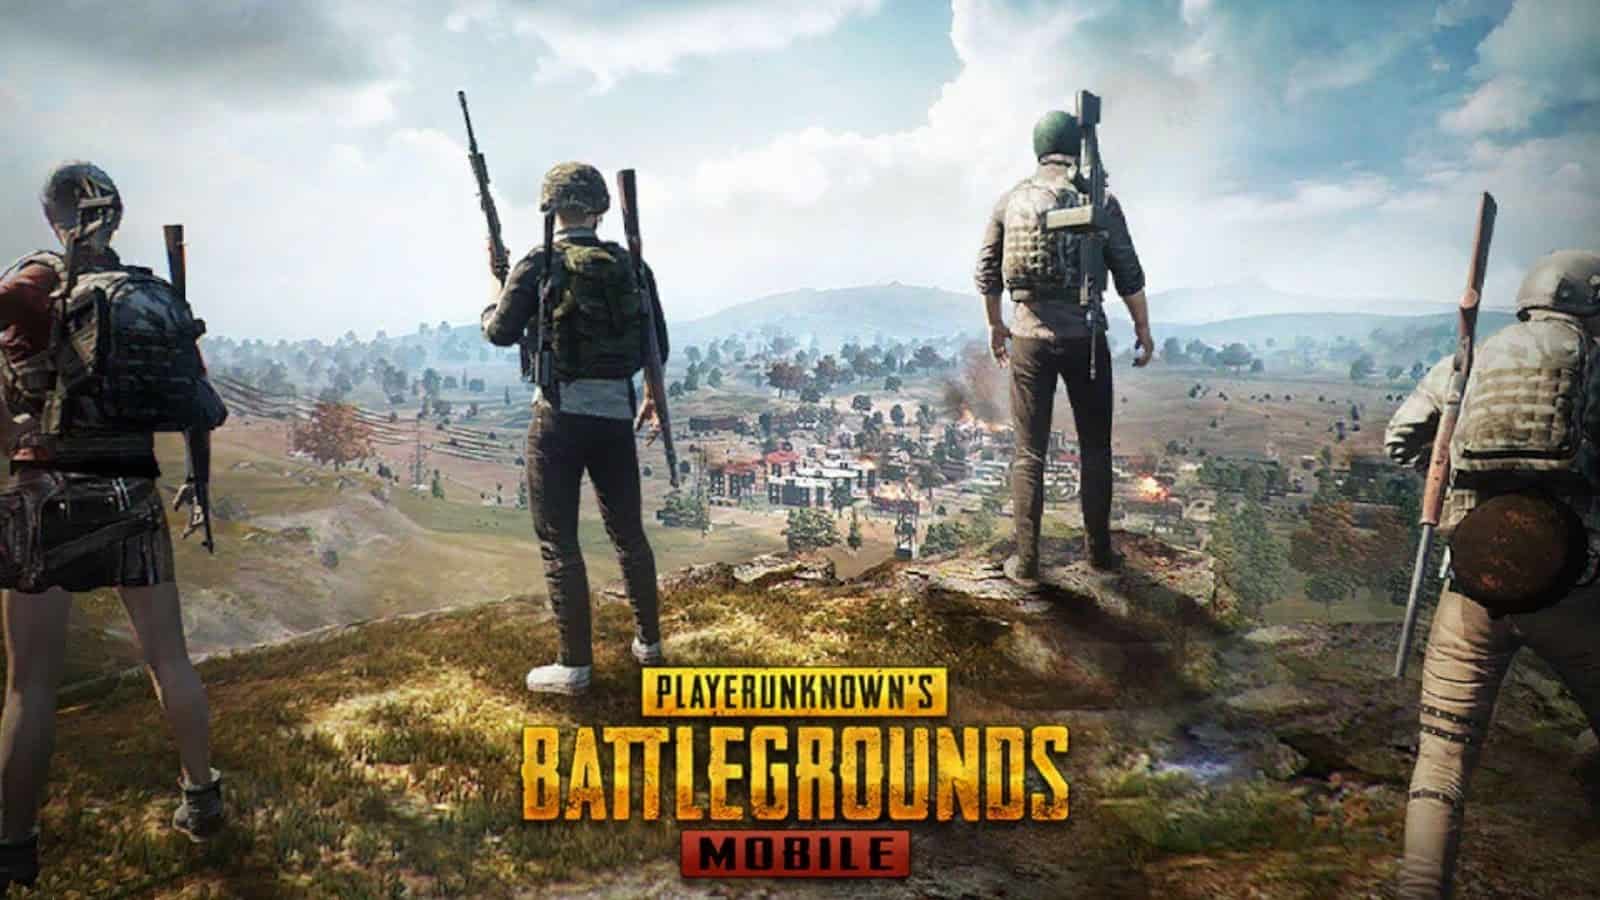 Rumor Mill Suggests PUBG Mobile 2 May Launch Next Week (UPDATE)